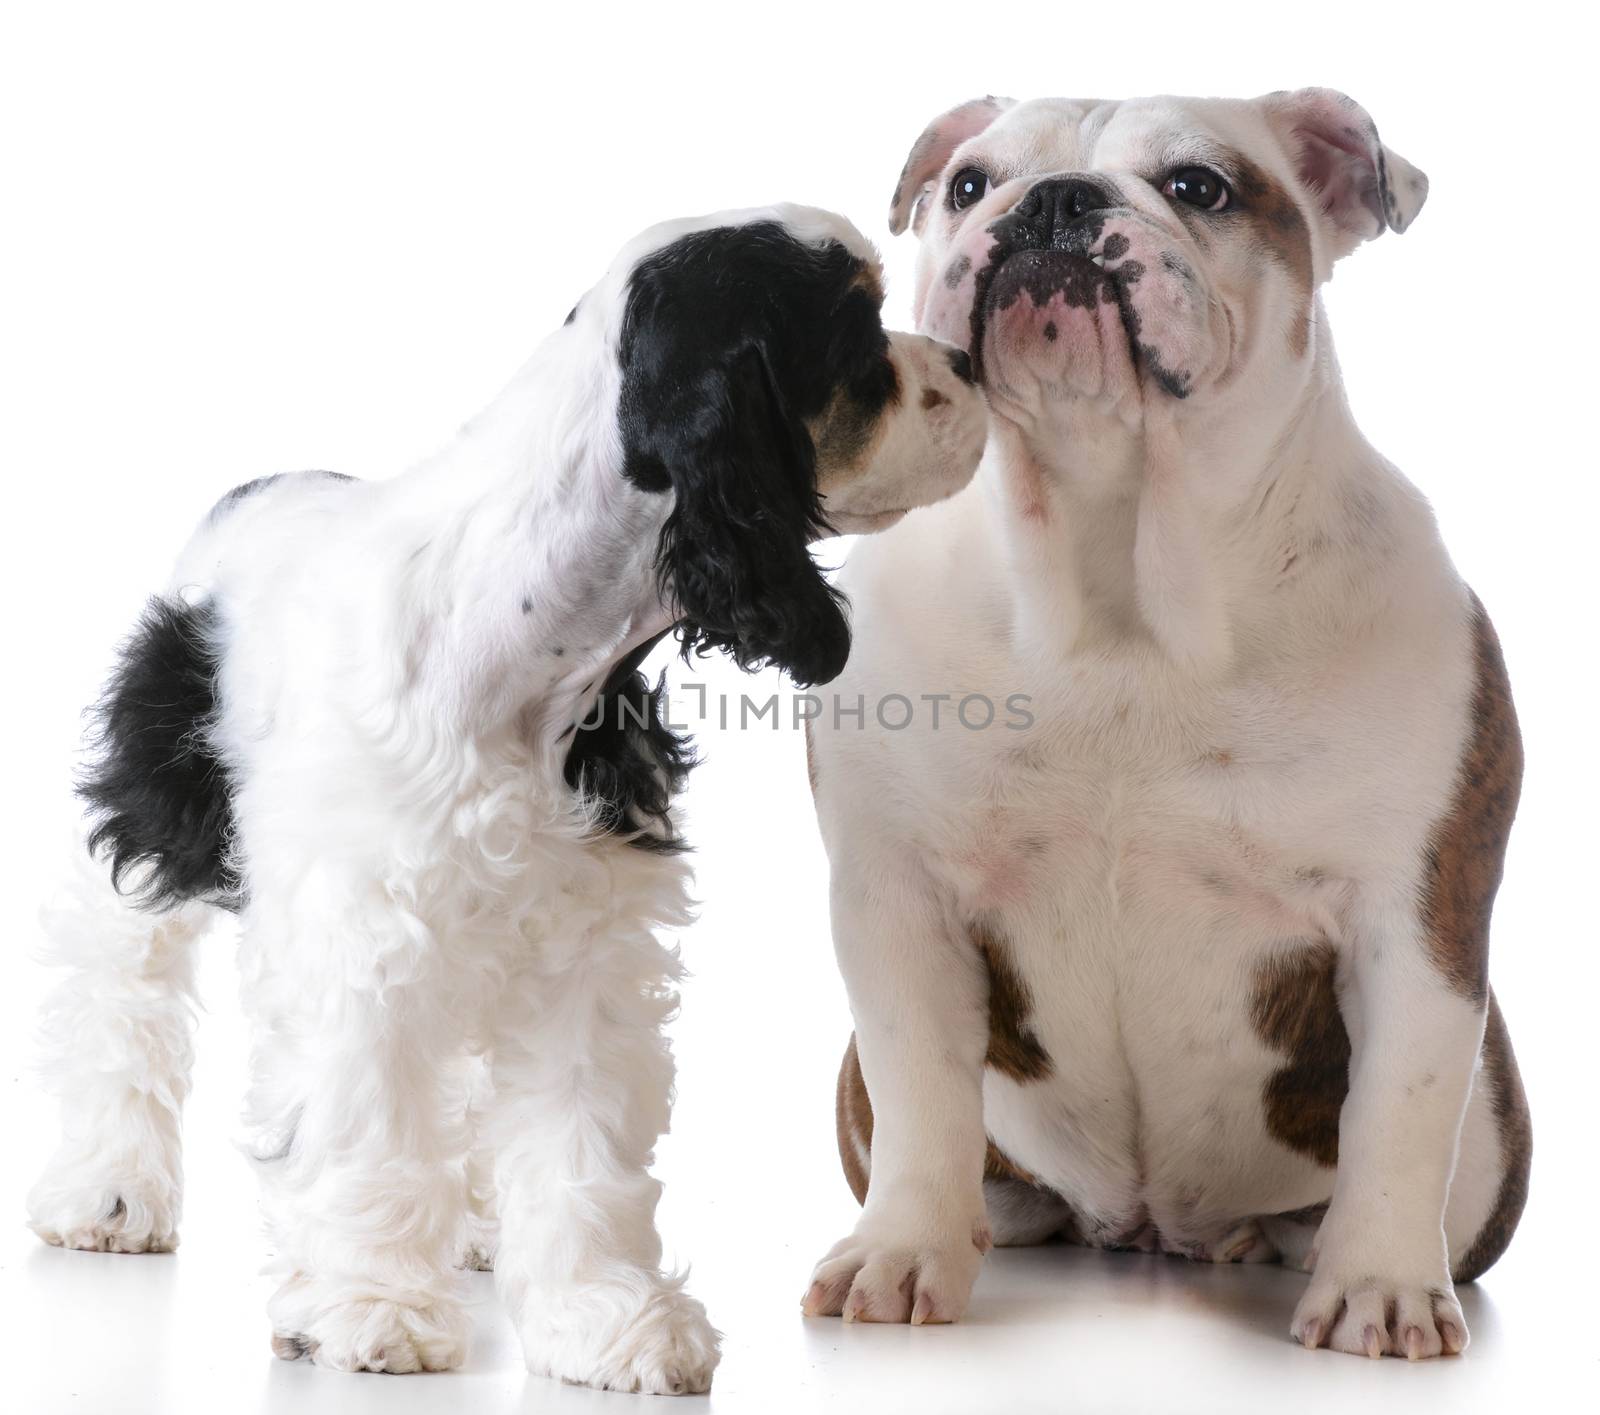 two puppies - american cocker spaniel and english bulldog puppies on white background